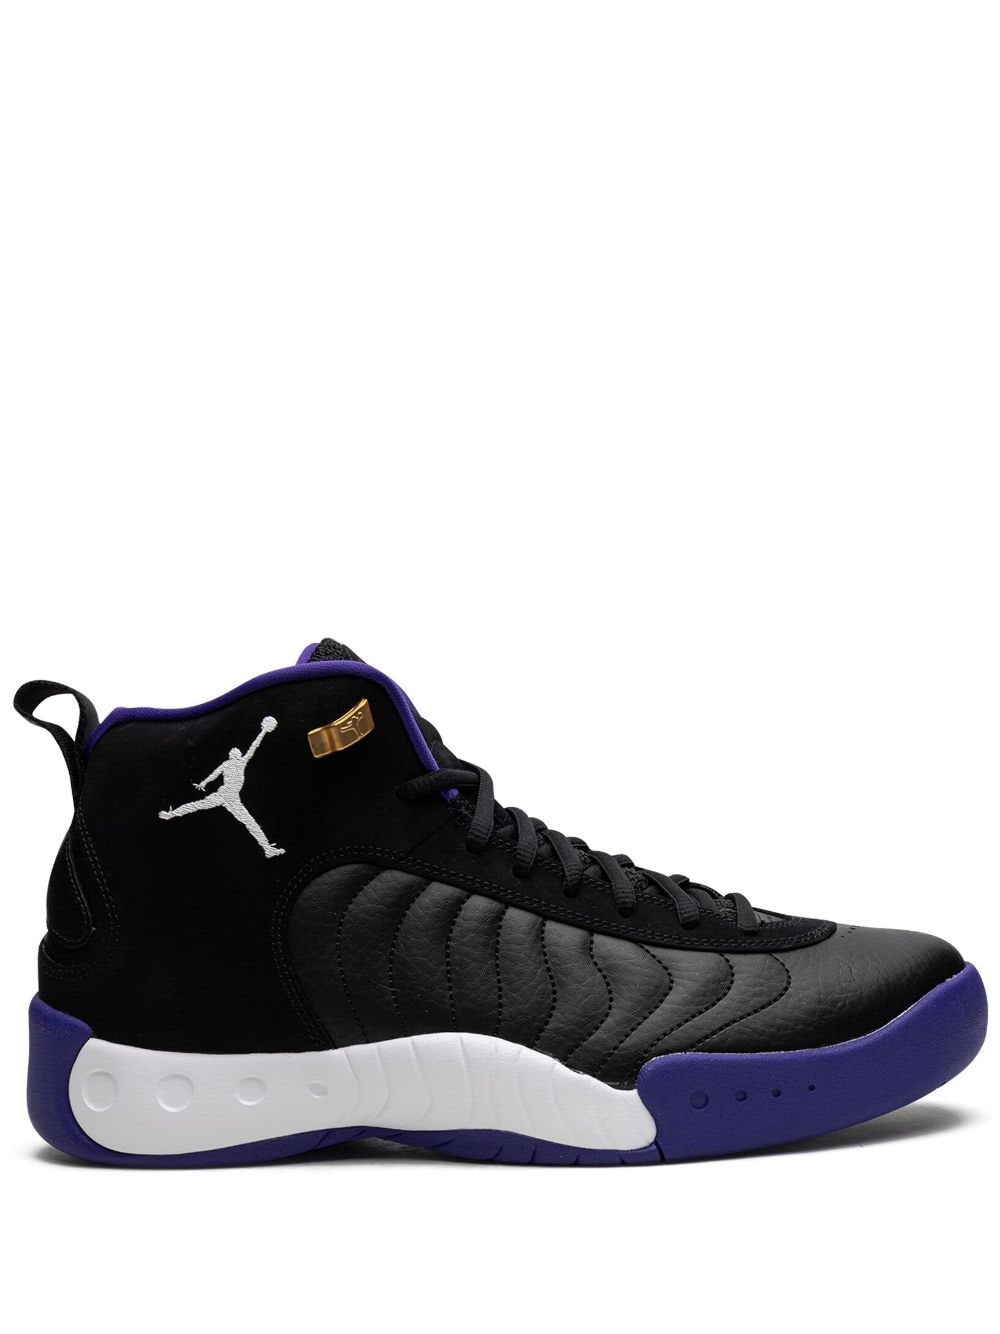 Jumpman Pro "Concord" sneakers - 1